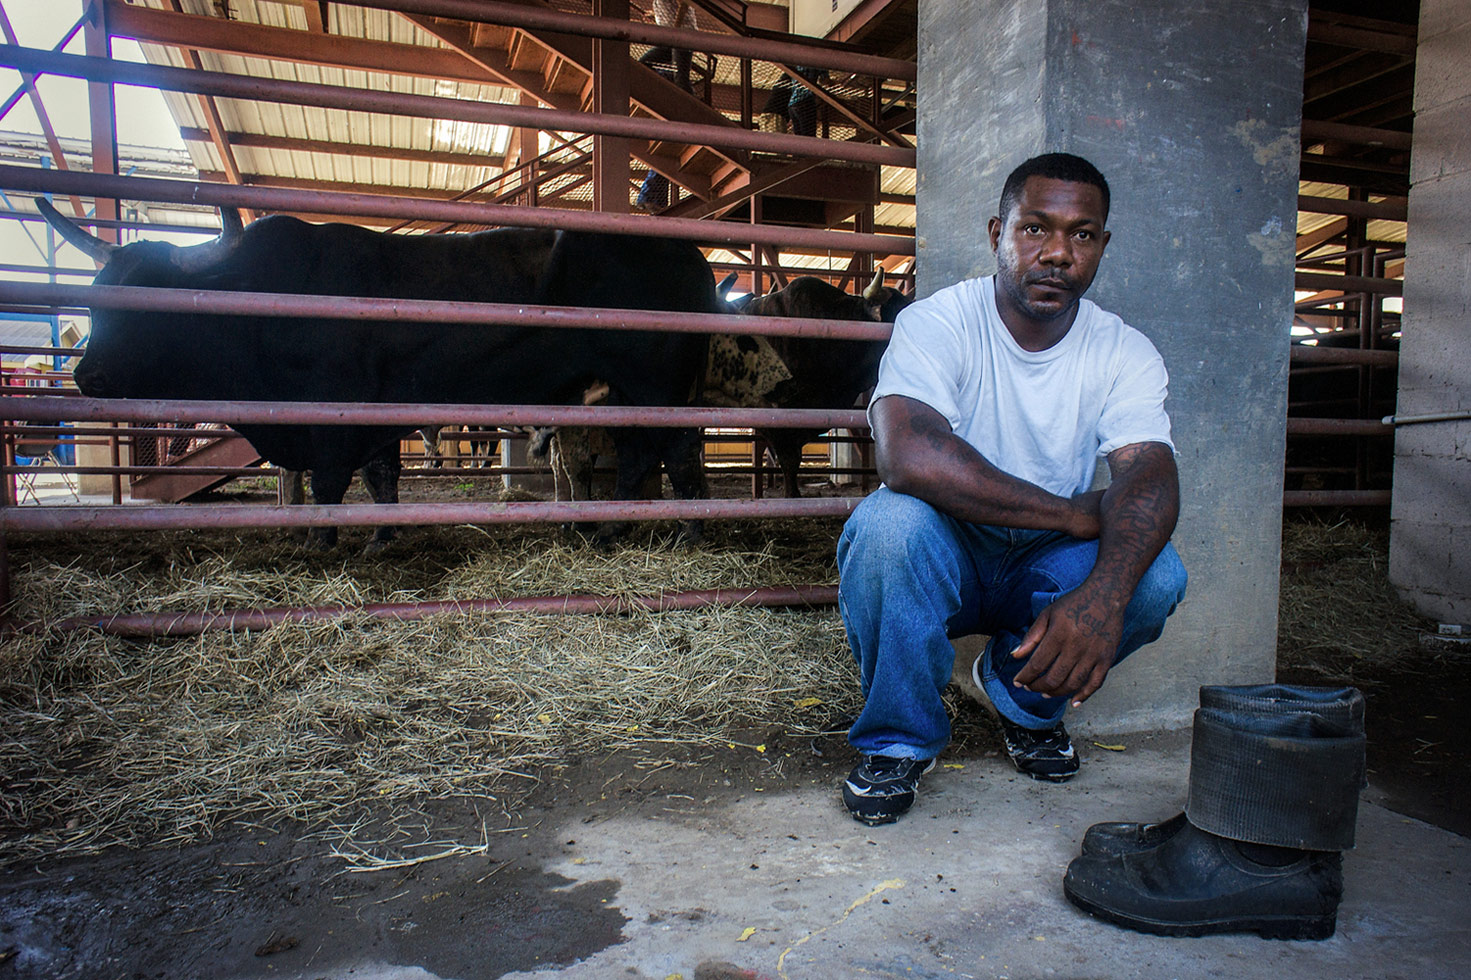 Brent, #576619, has been incarcerated for six years now and has been in Angola for two. He was caught by federal agents who raided his house and found 60 kilos of cocaine. "I was trying to make ends meet, but my greed took over." Brent competed in three events in the rodeo.